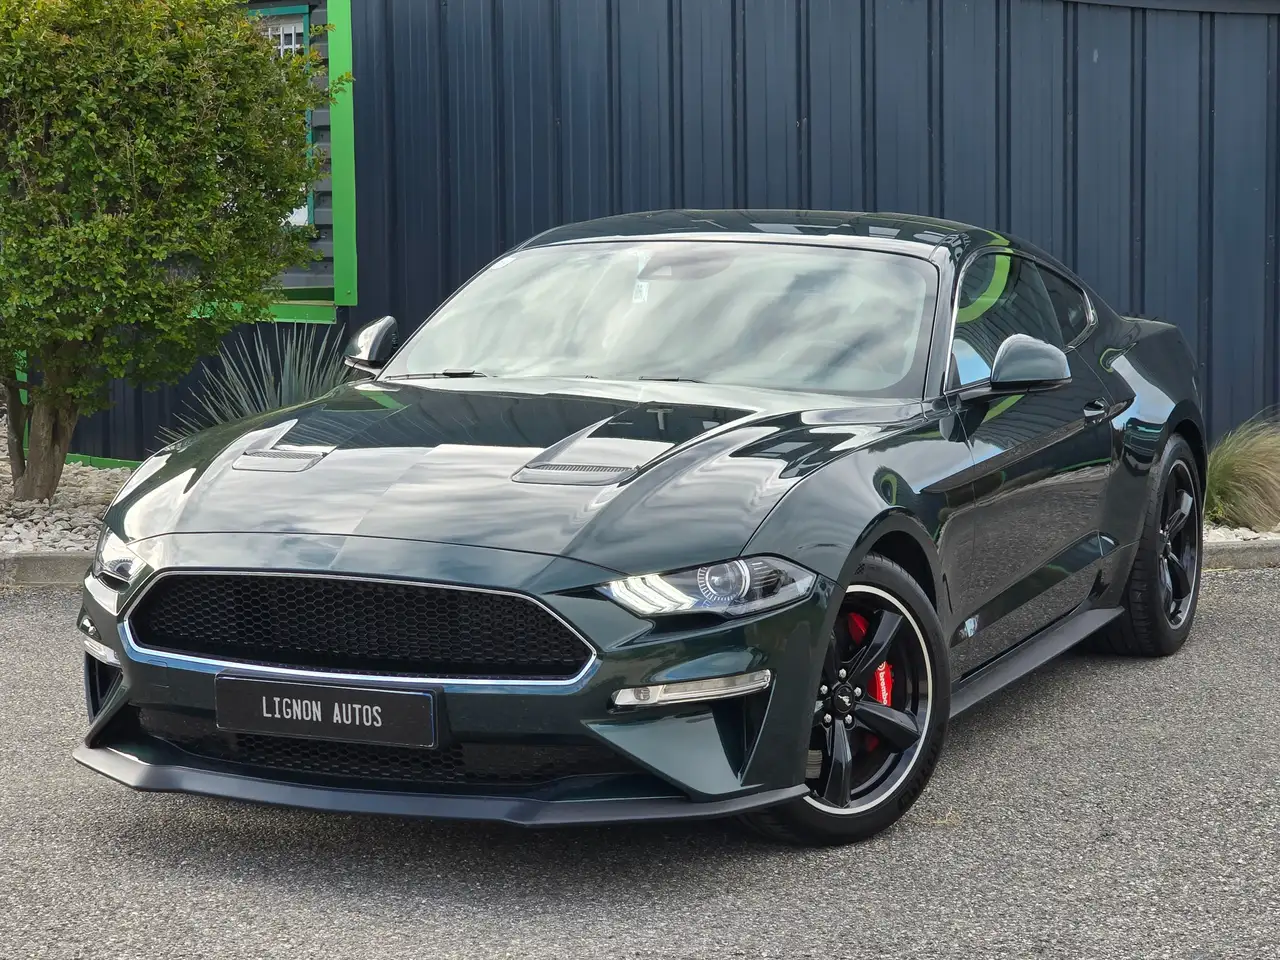 2018 - Ford Mustang Mustang Boîte manuelle Coupé